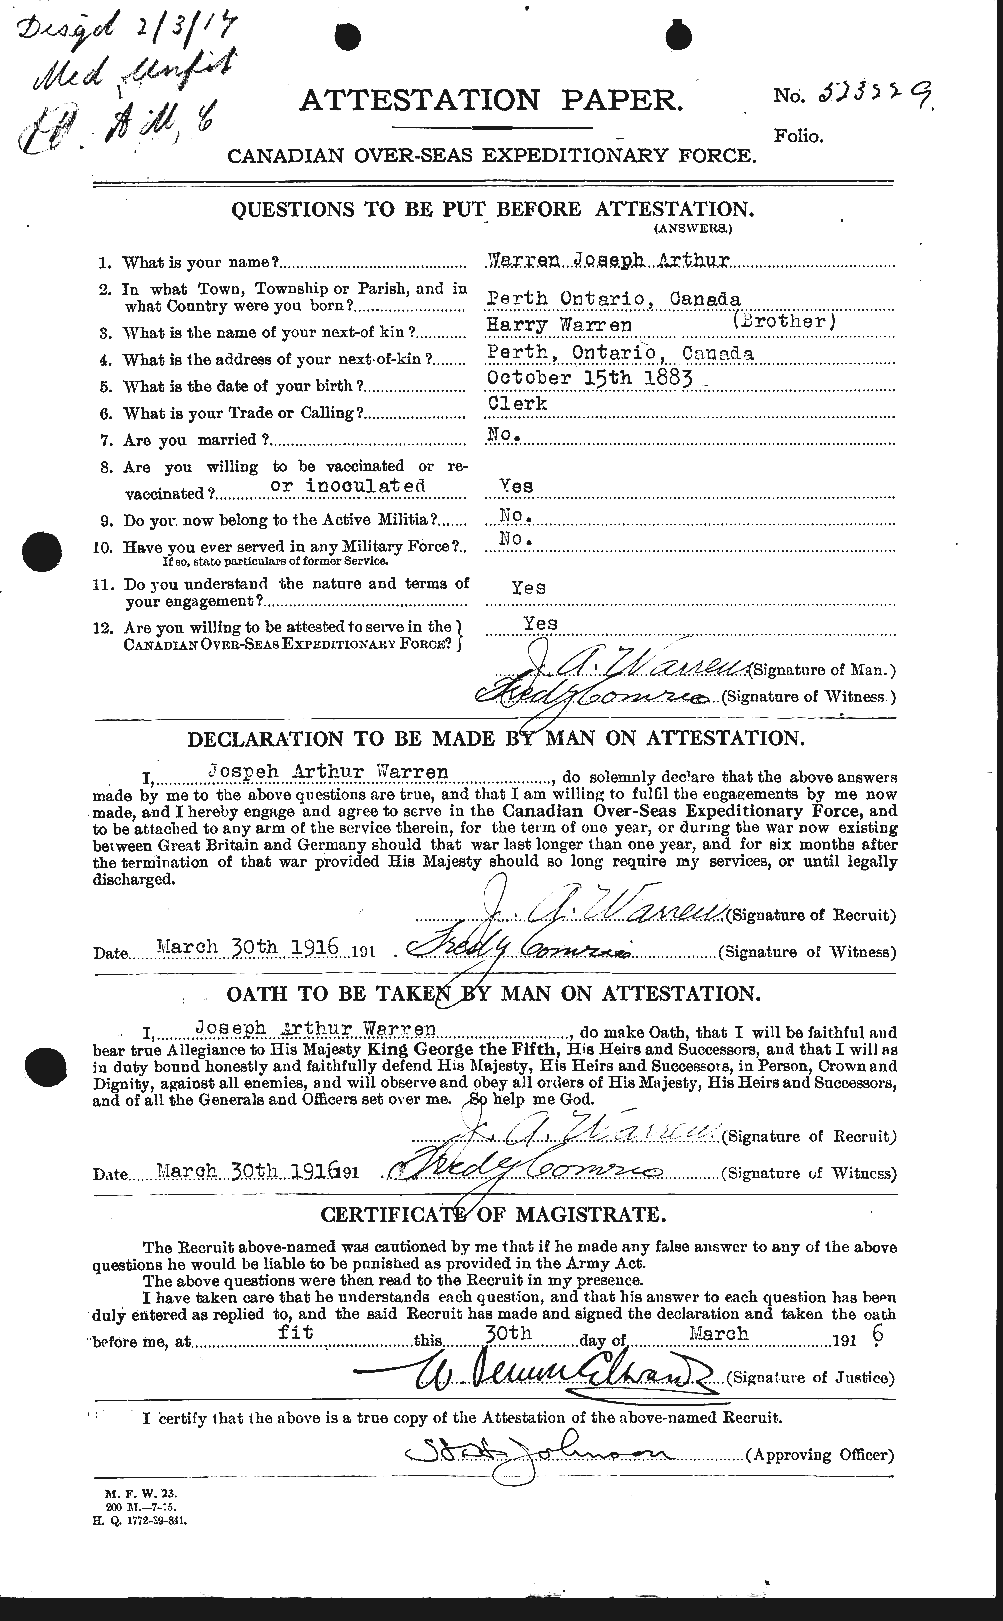 Personnel Records of the First World War - CEF 658569a